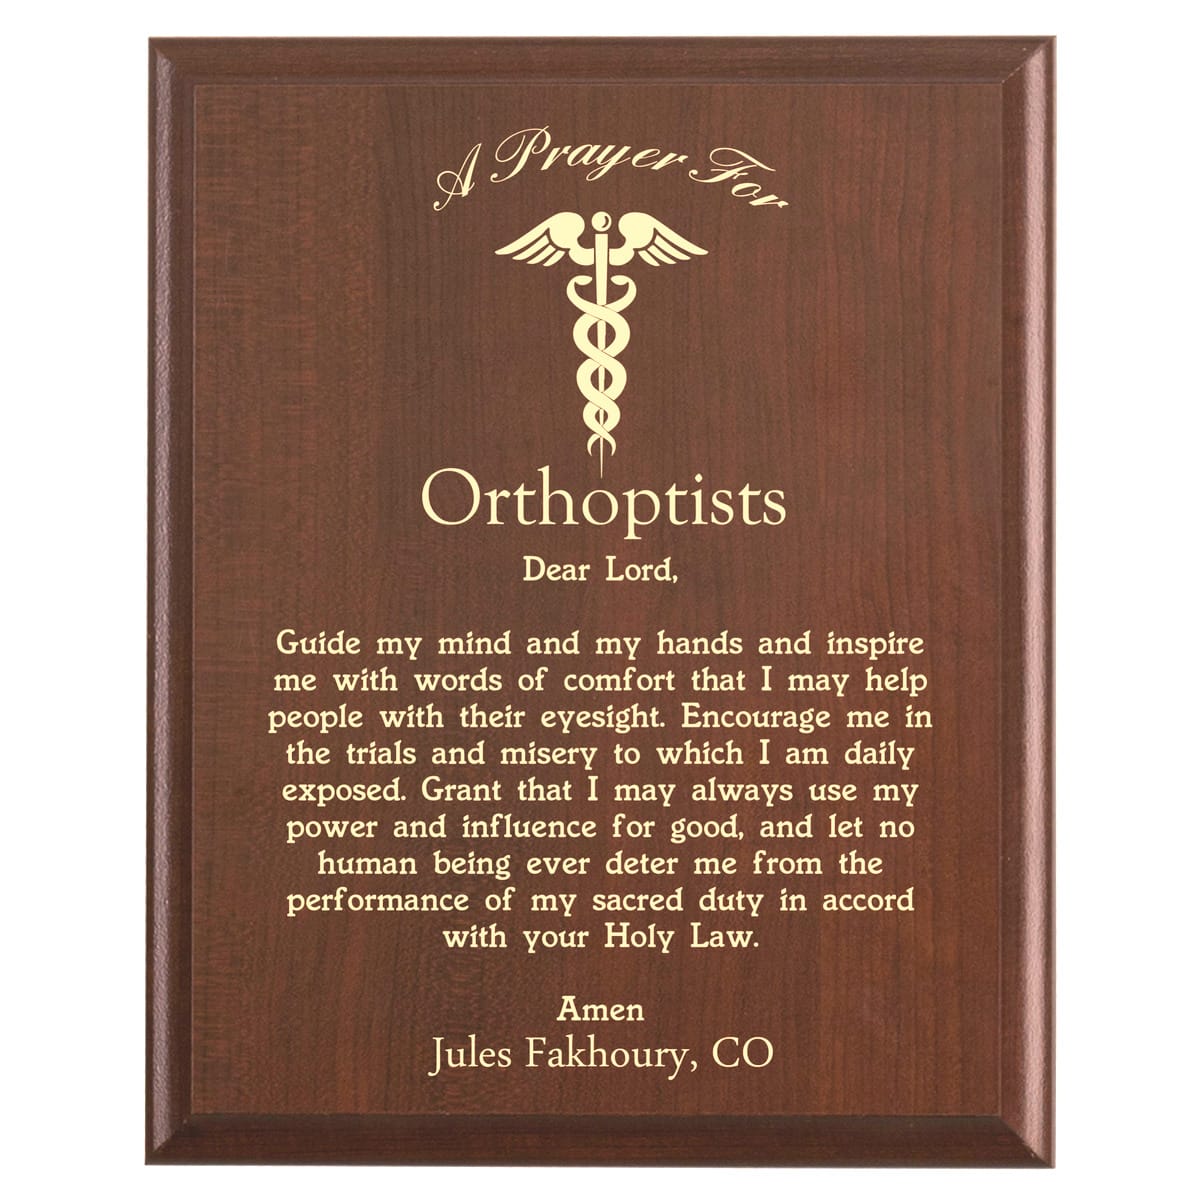 Plaque photo: Orthoptist Prayer Plaque design with free personalization. Wood style finish with customized text.